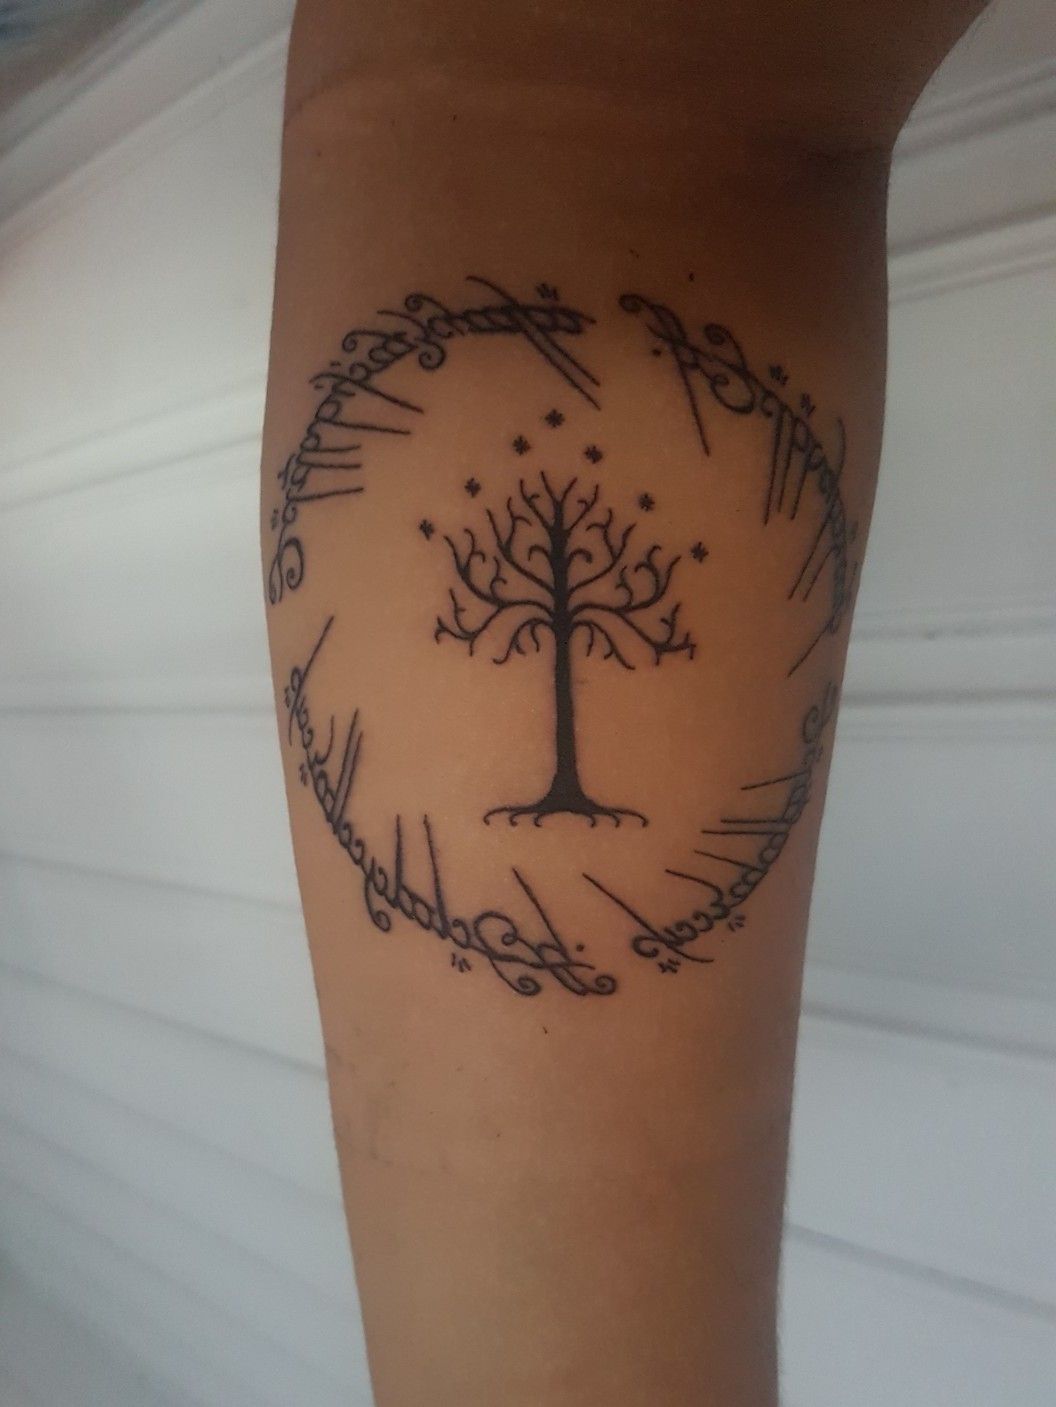 New narsiltree of gondor tattoo Im so happy with this it was worth every  second of pain  rlotr